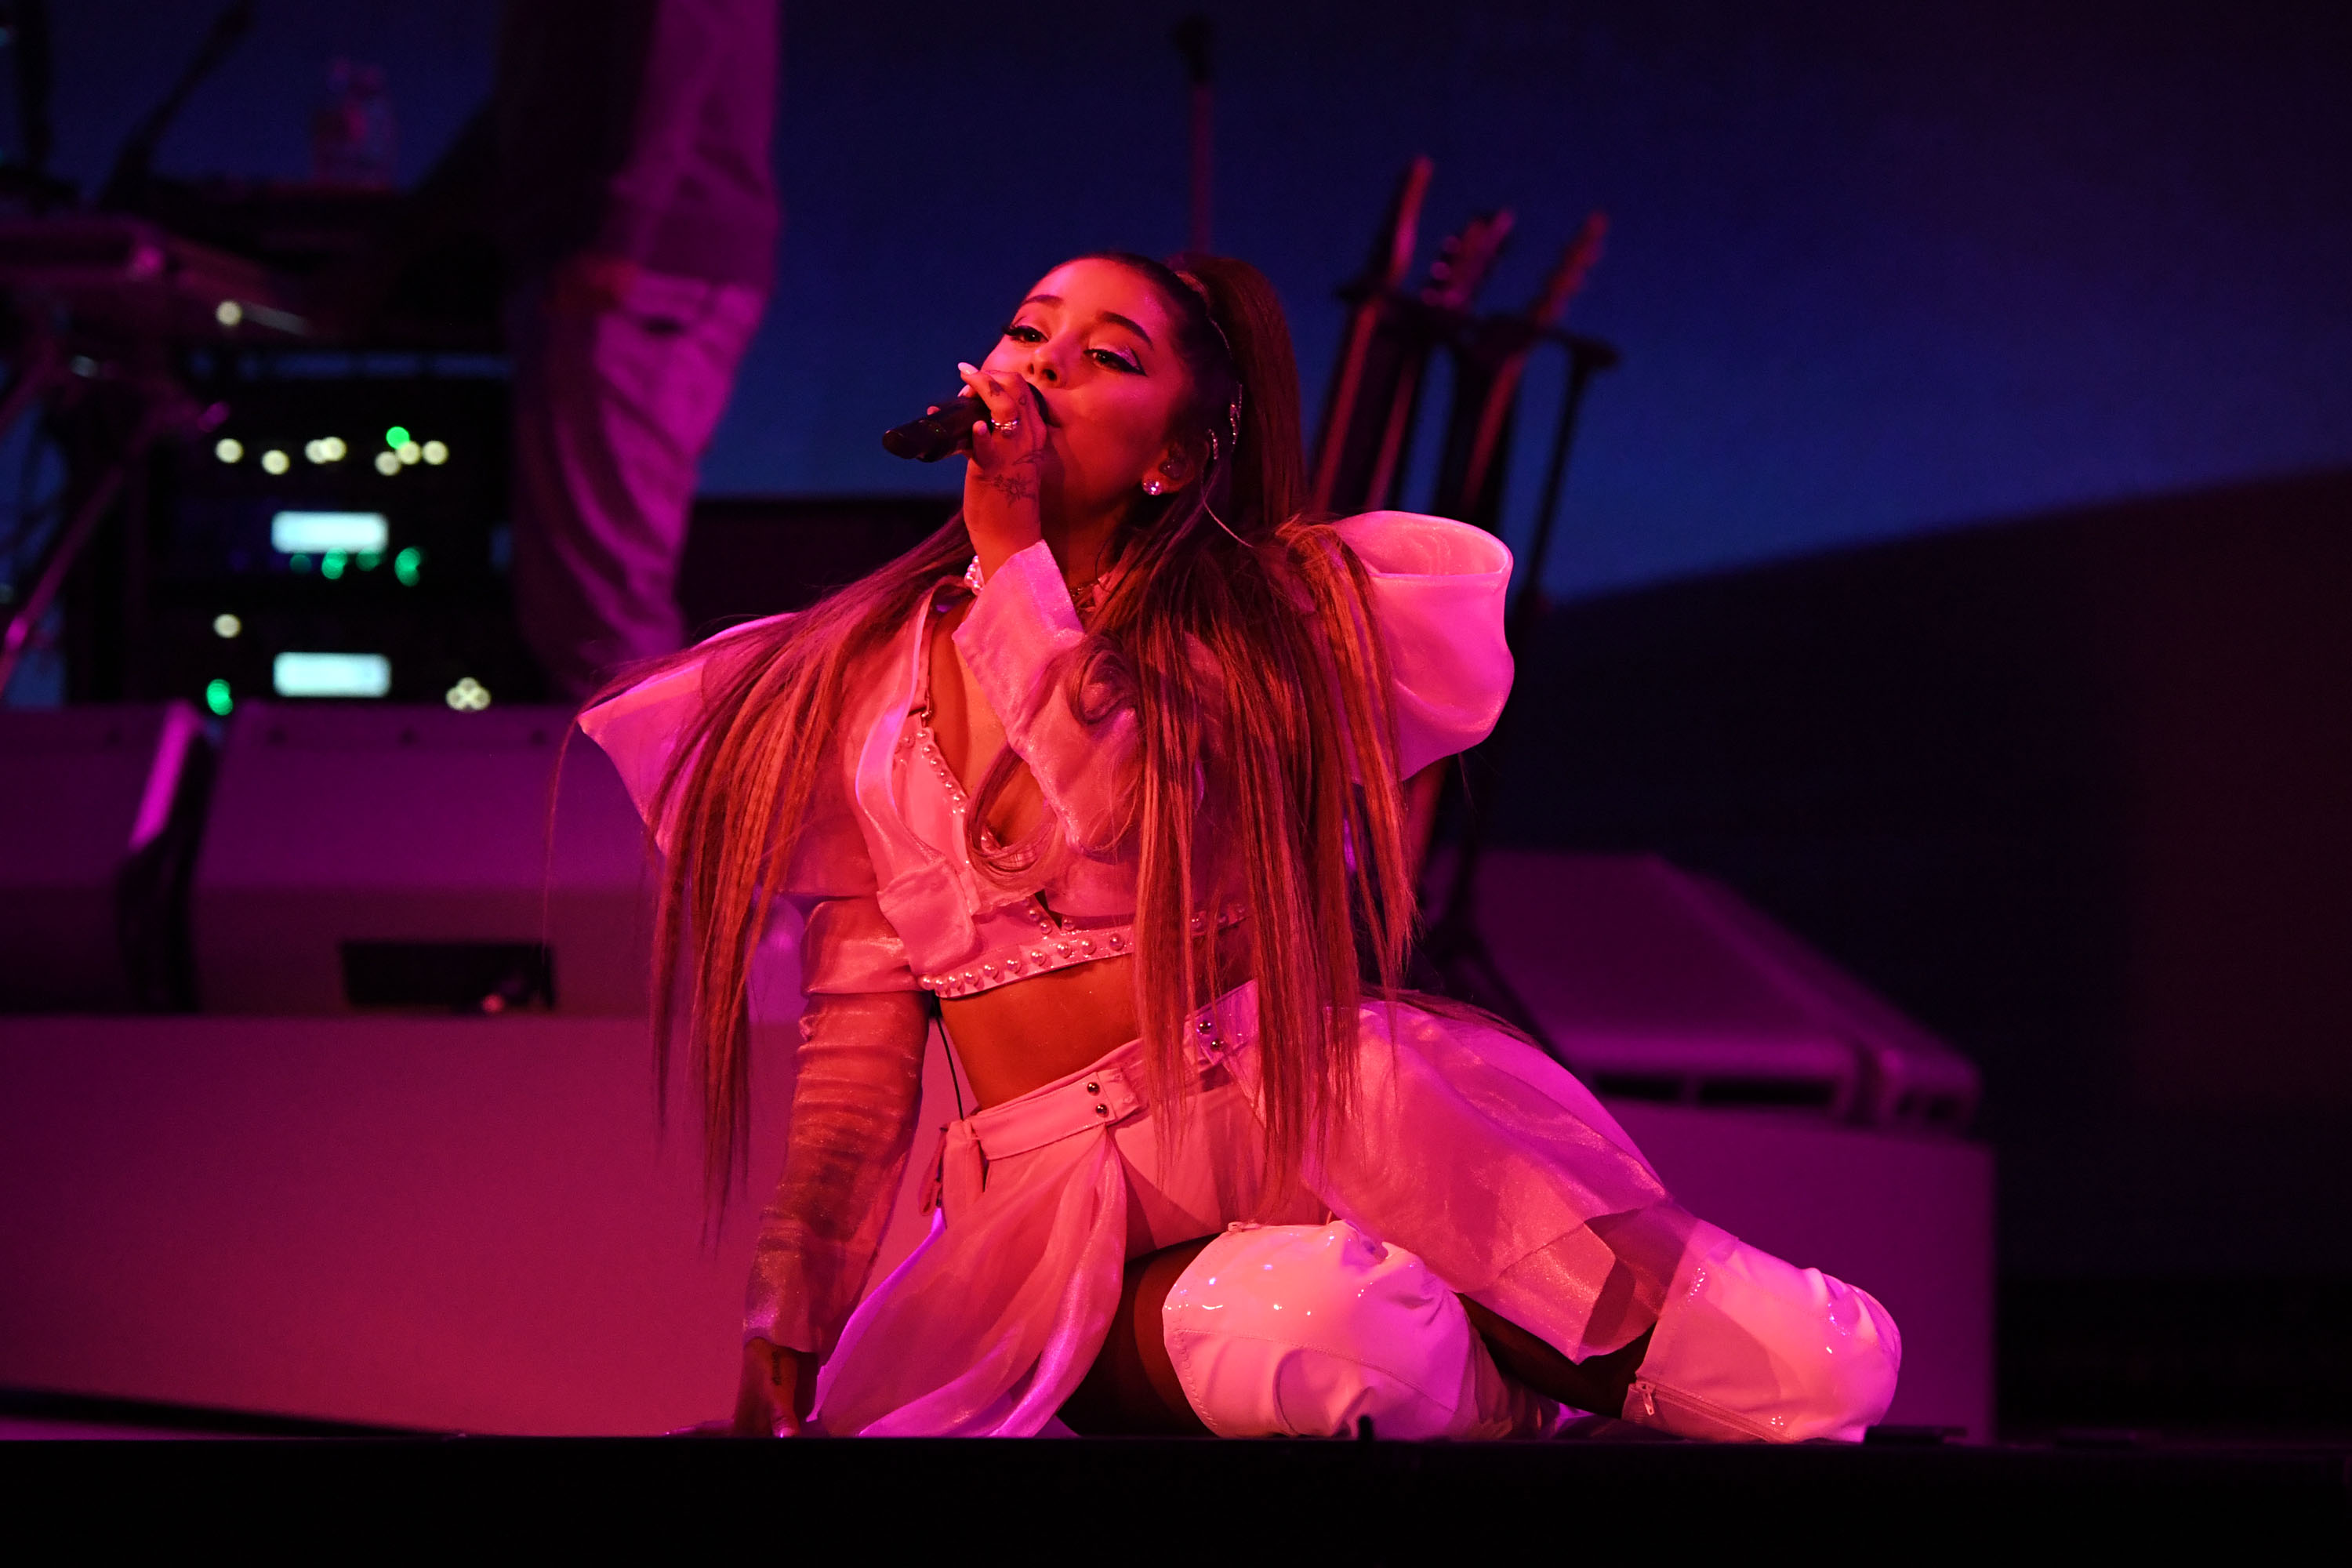 Ariana Grande performs onstage during the Sweetener World Tour on March 18, 2019 in Albany, New York.